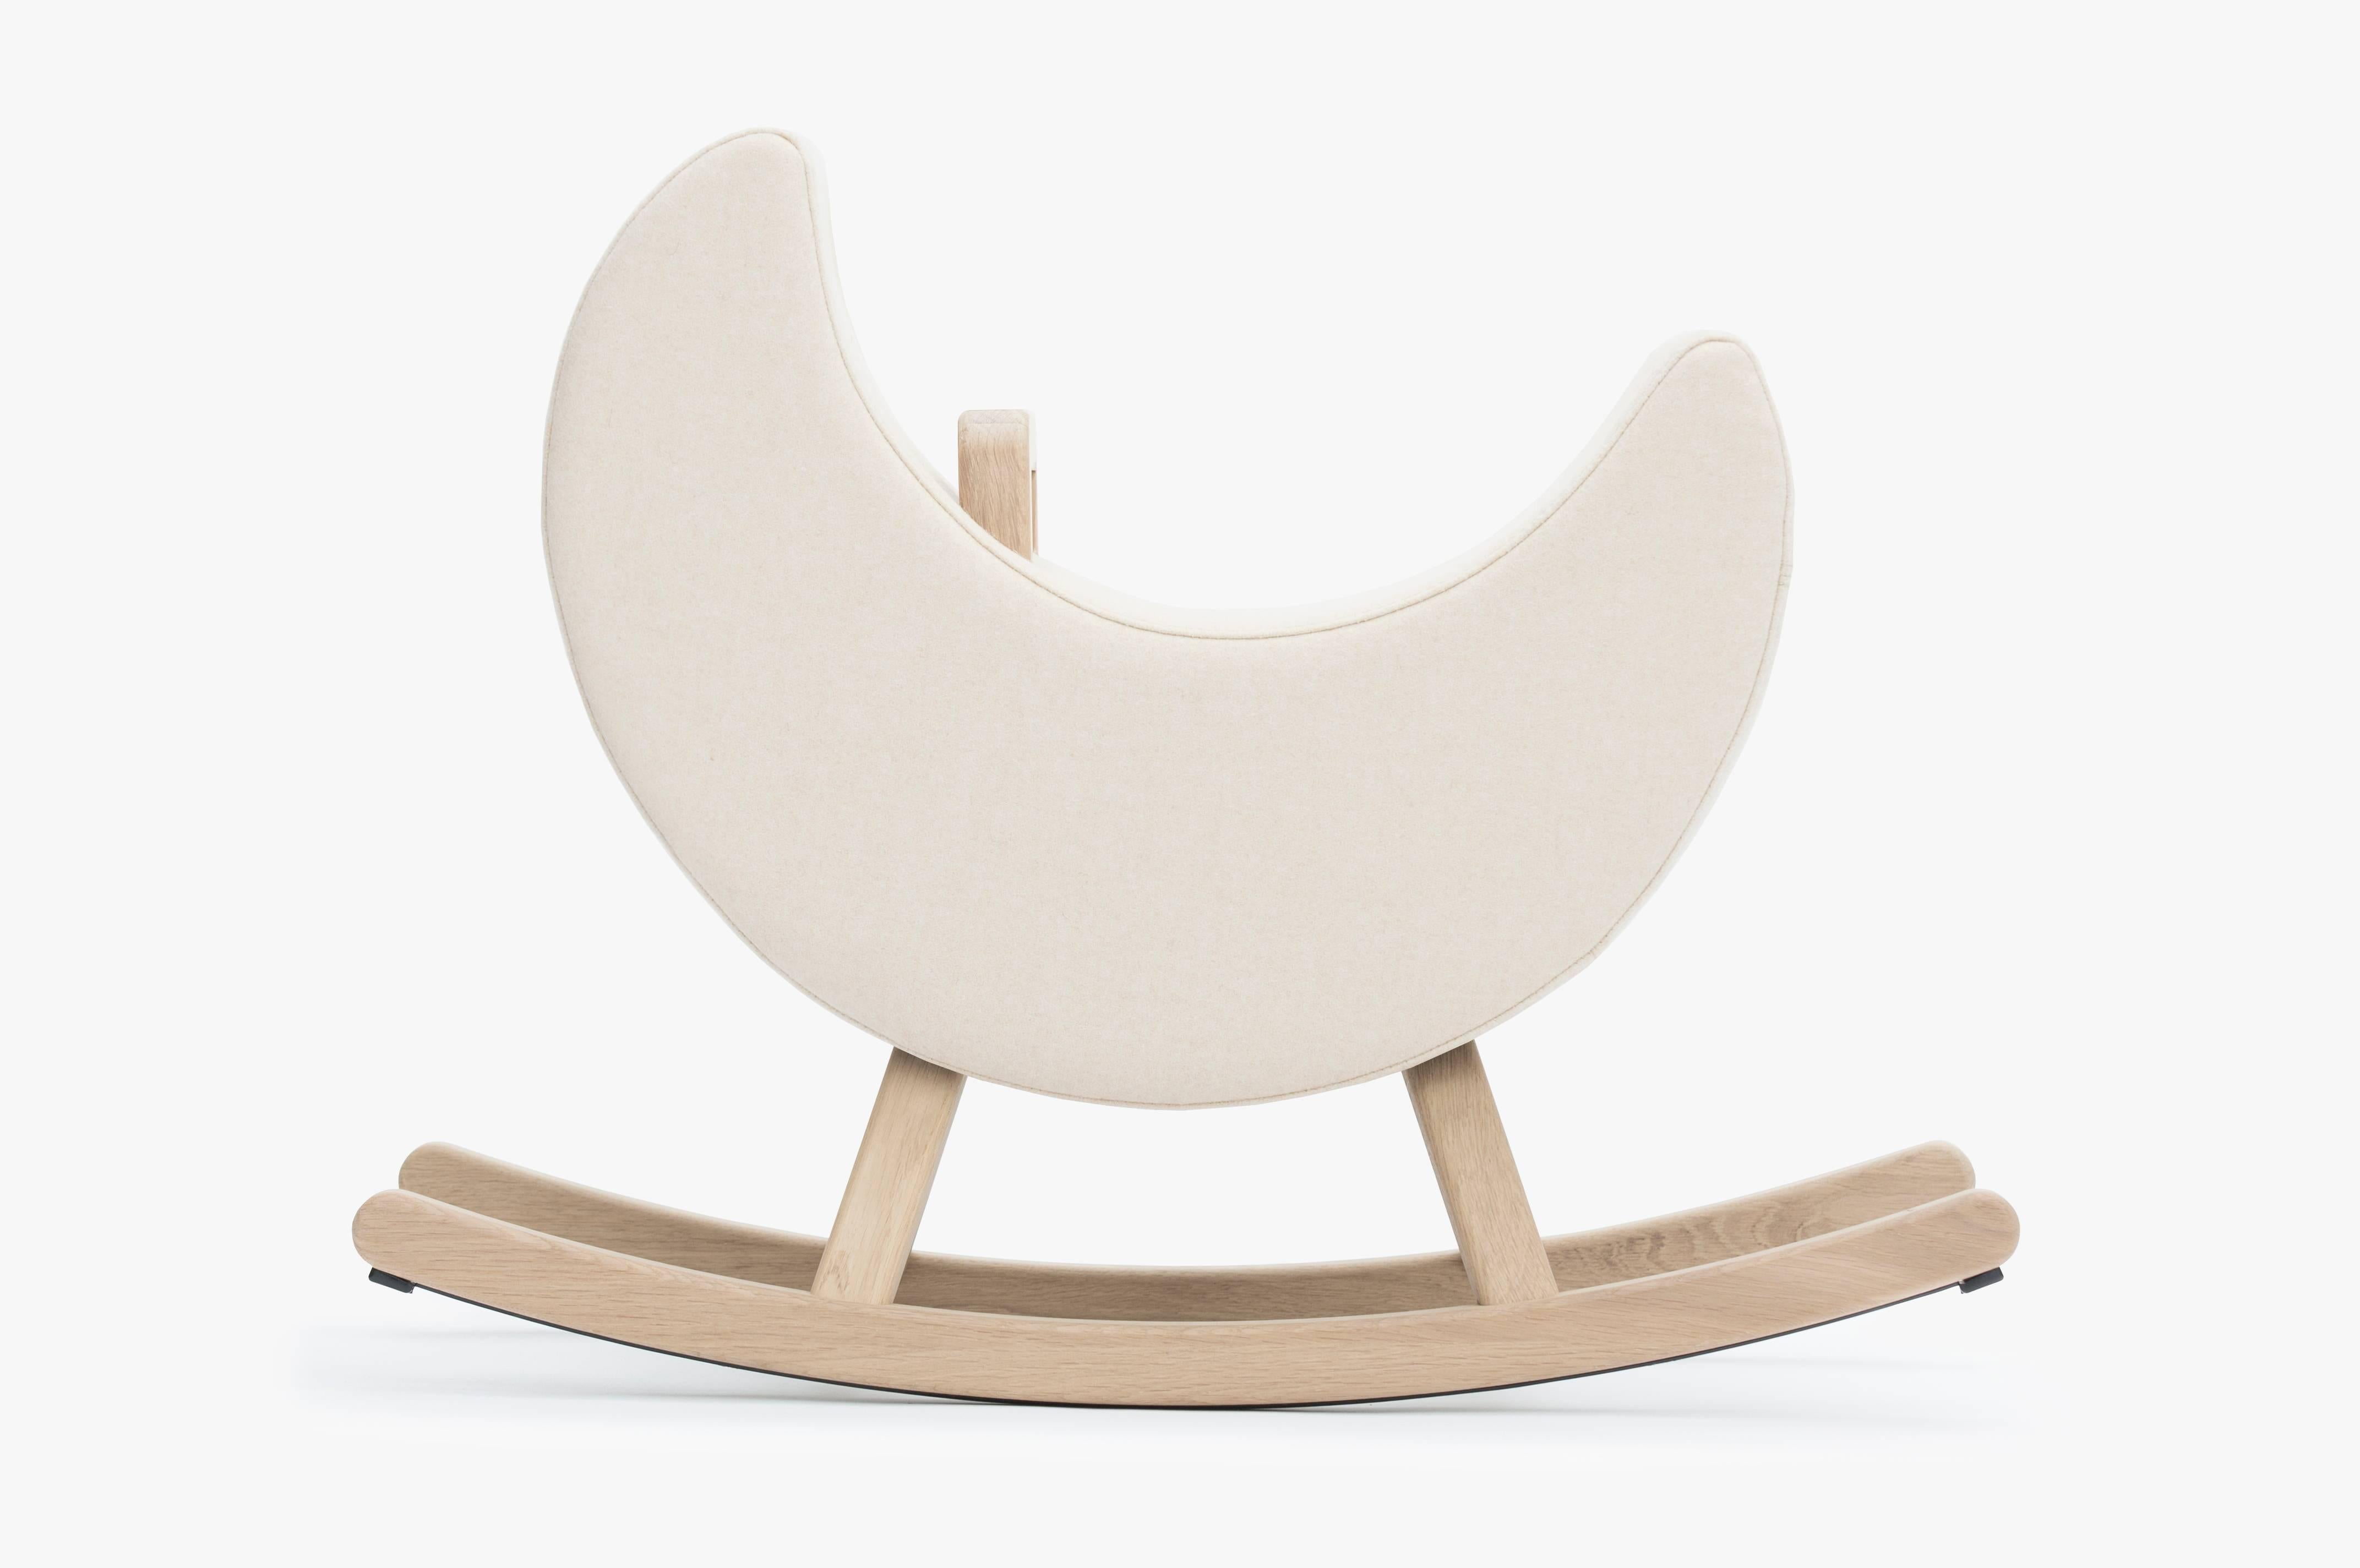 Iconic Moon Stardust child rocker by Maison Deux, Netherlands, 2016

Maison Deux
Contemporary, Netherlands, 2016
French oak, Kvadrat wool, rubber
Measures: L 27 in, seat H 15.75 in, D 10.5 in.

Lead time 2-4 weeks if not in stock.

 